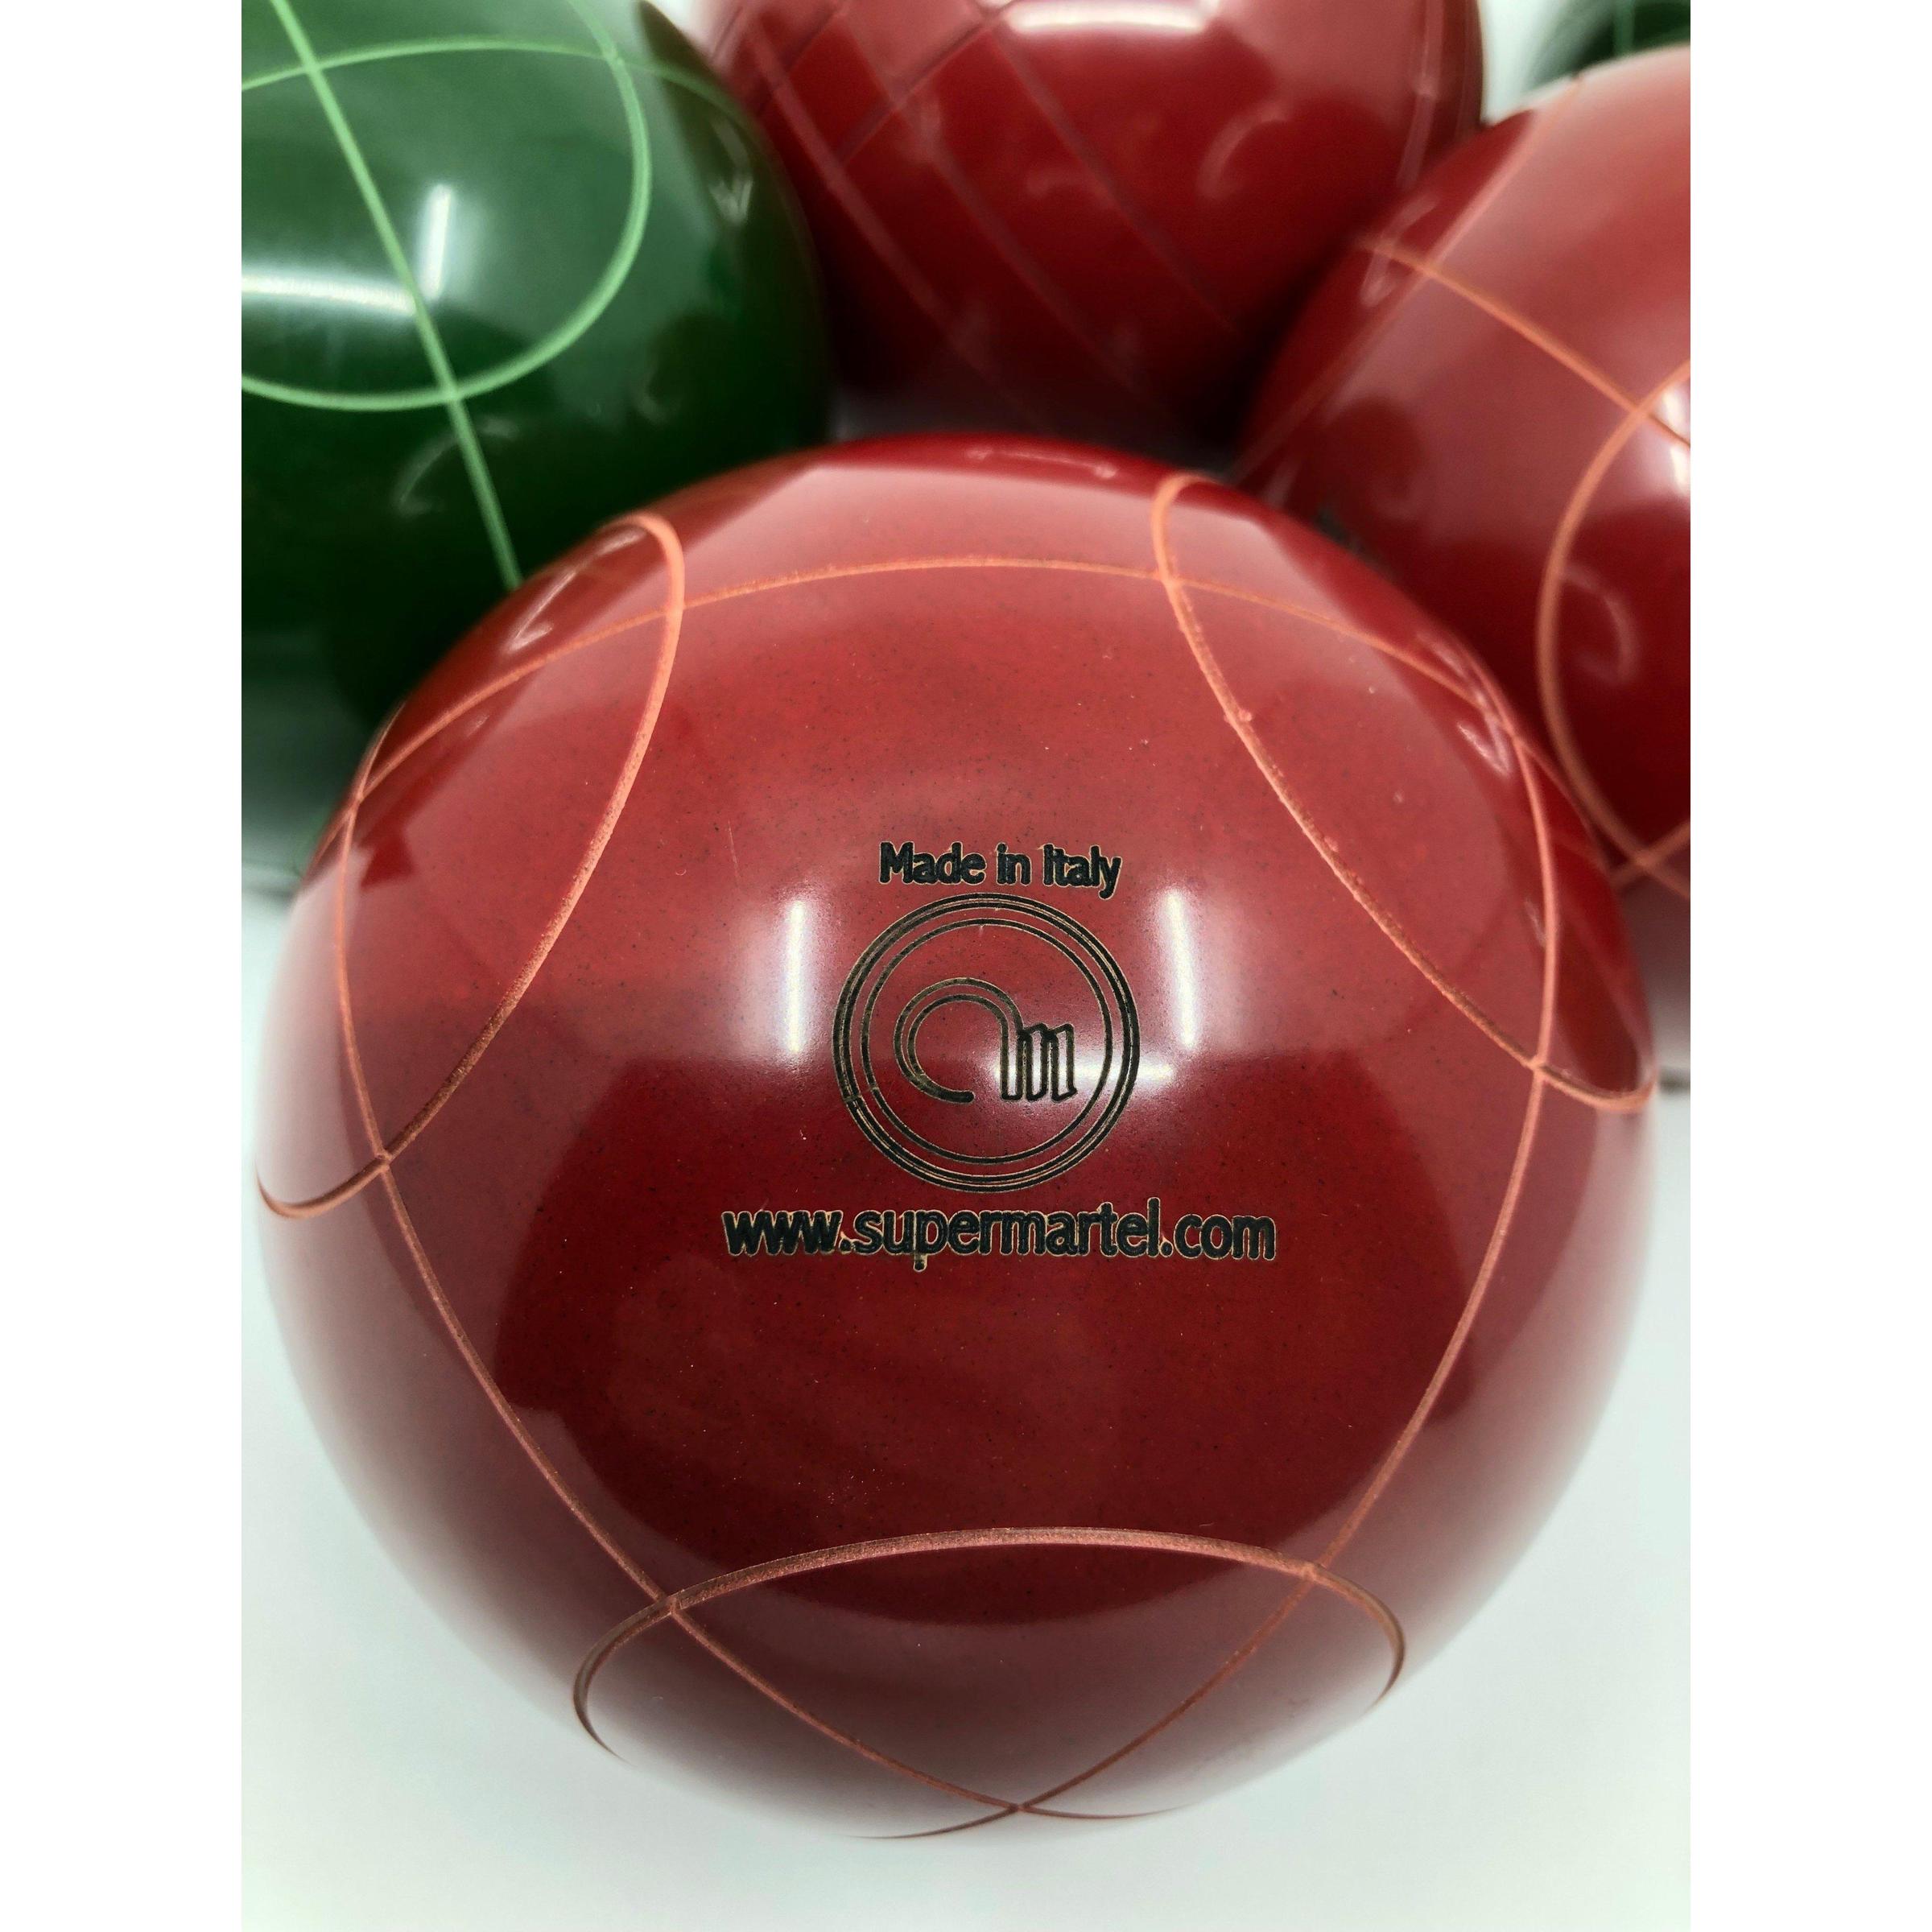 Made in Italy Super Martel Professional Bocce Ball Set 107mm Tournament Rated Bocce Balls - Official Ball of World Champions - Includes Carrying Bag